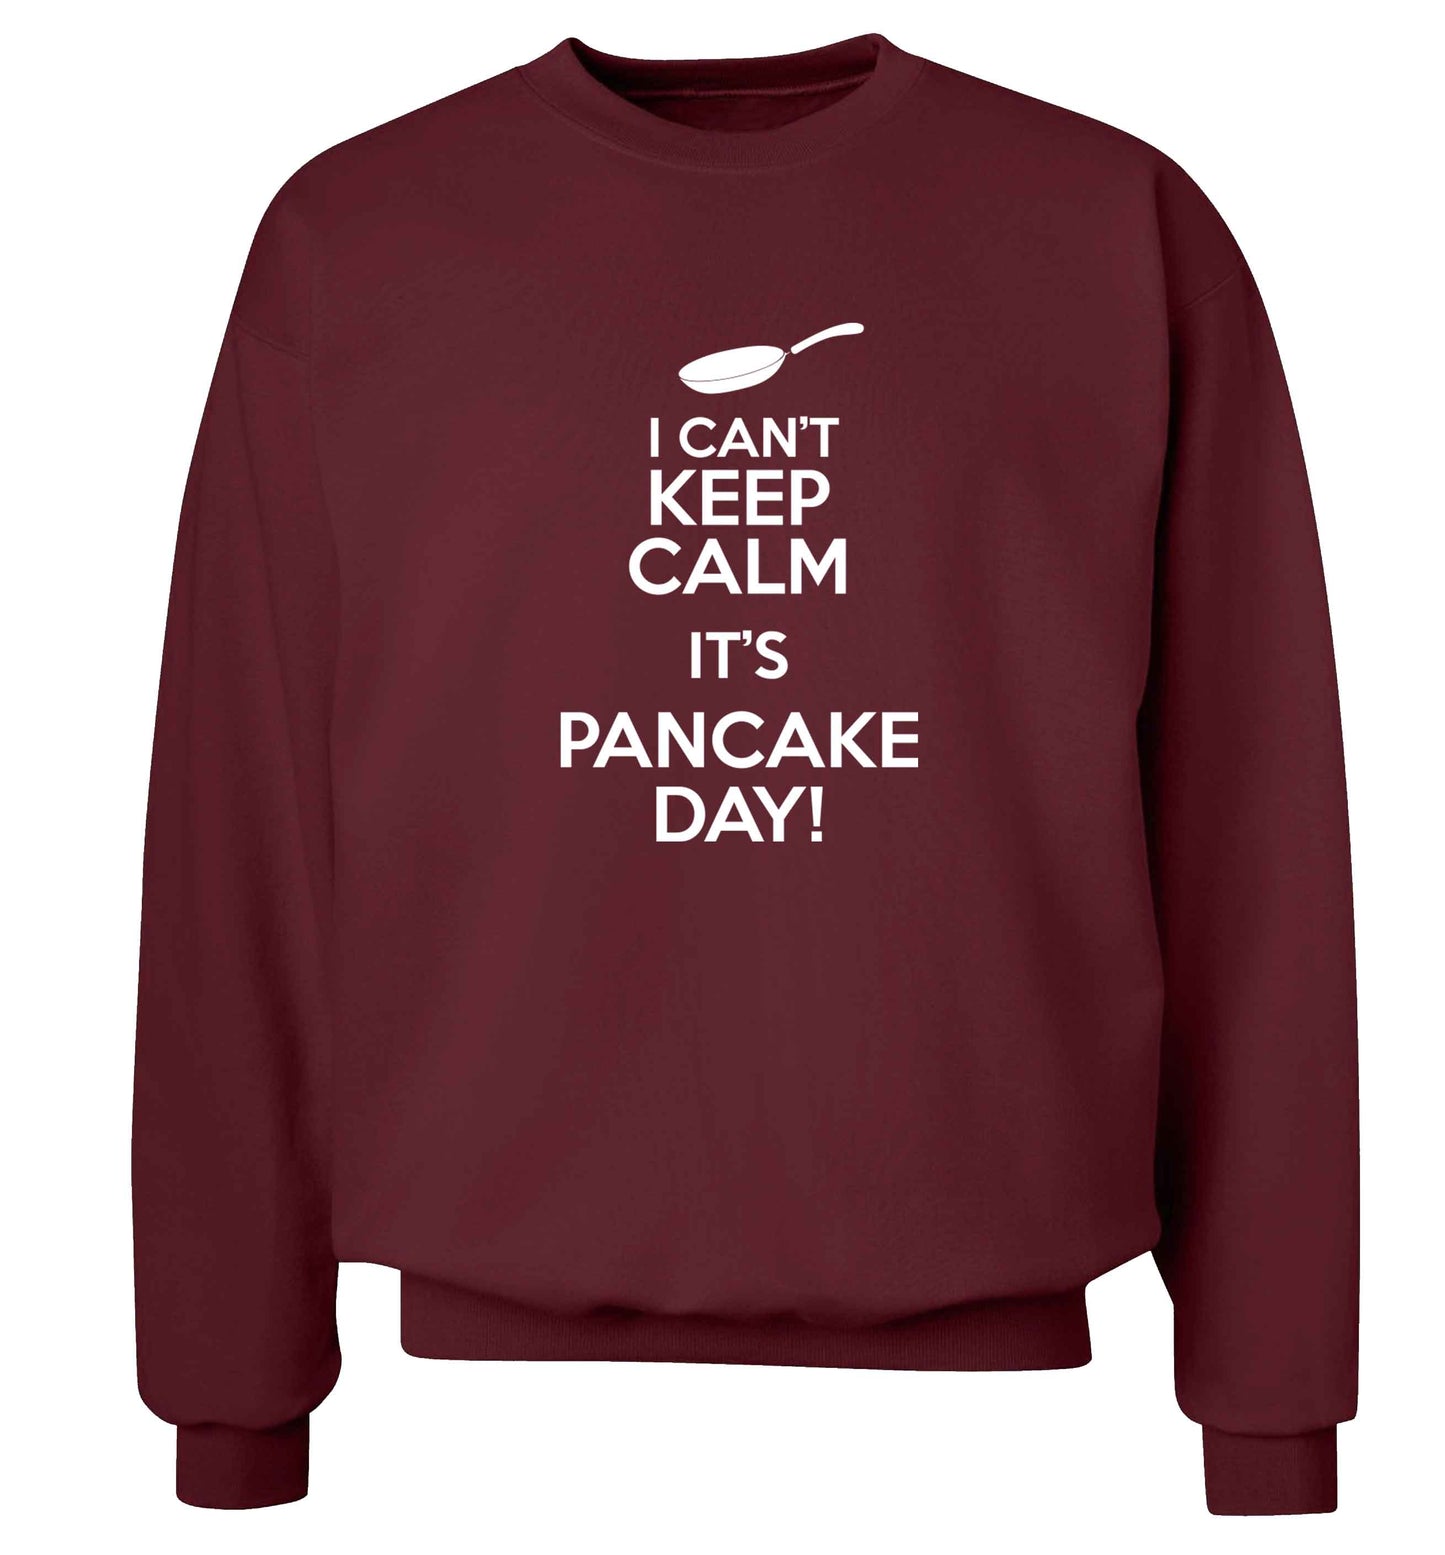 I can't keep calm it's pancake day! adult's unisex maroon sweater 2XL